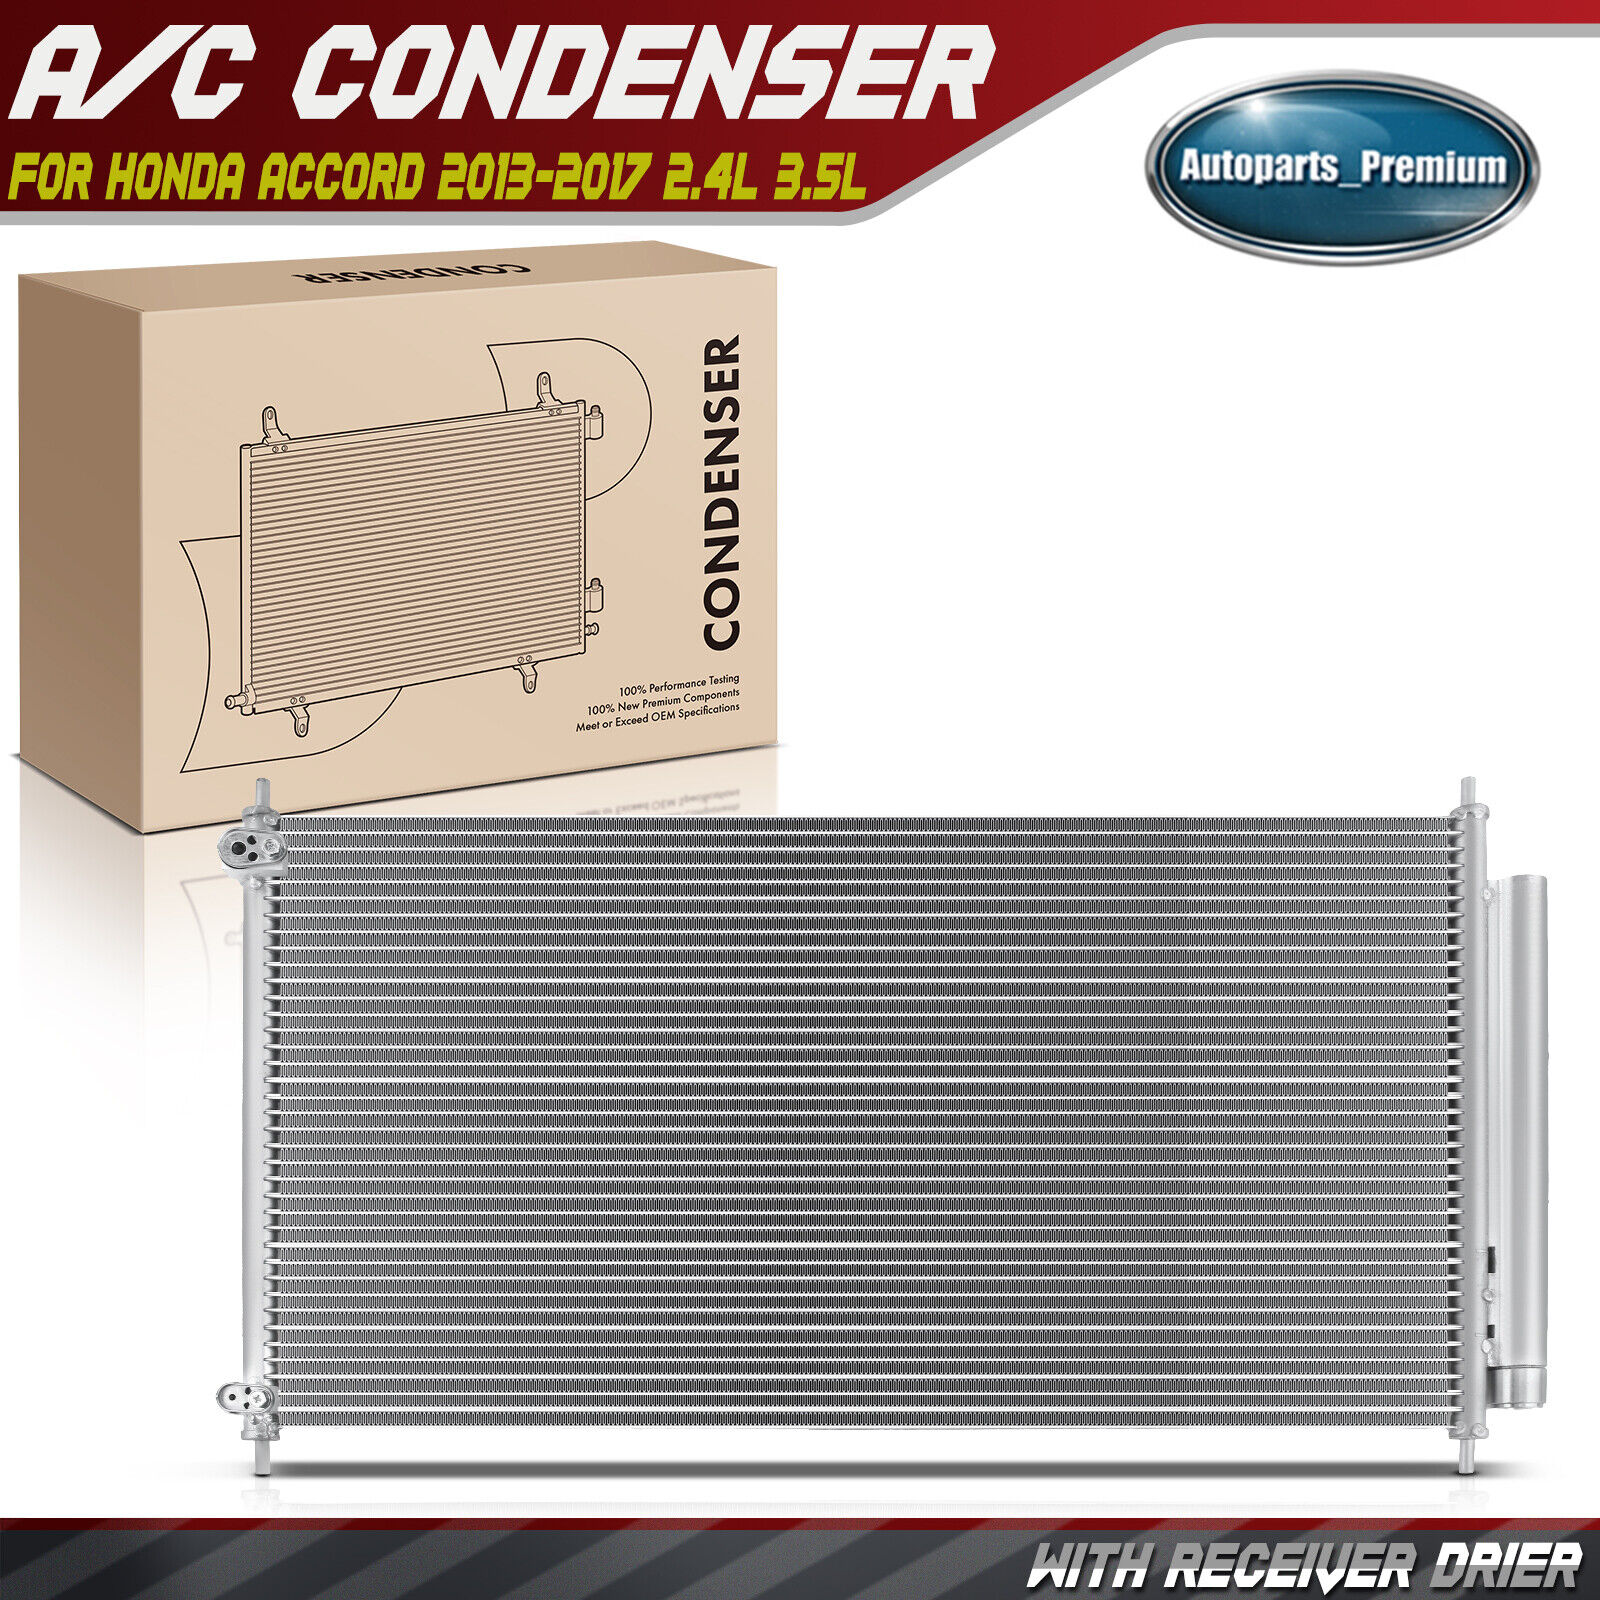 AC A/C Condenser with Receiver Drier for Honda Accord 2013 2014 2015 2016 2017